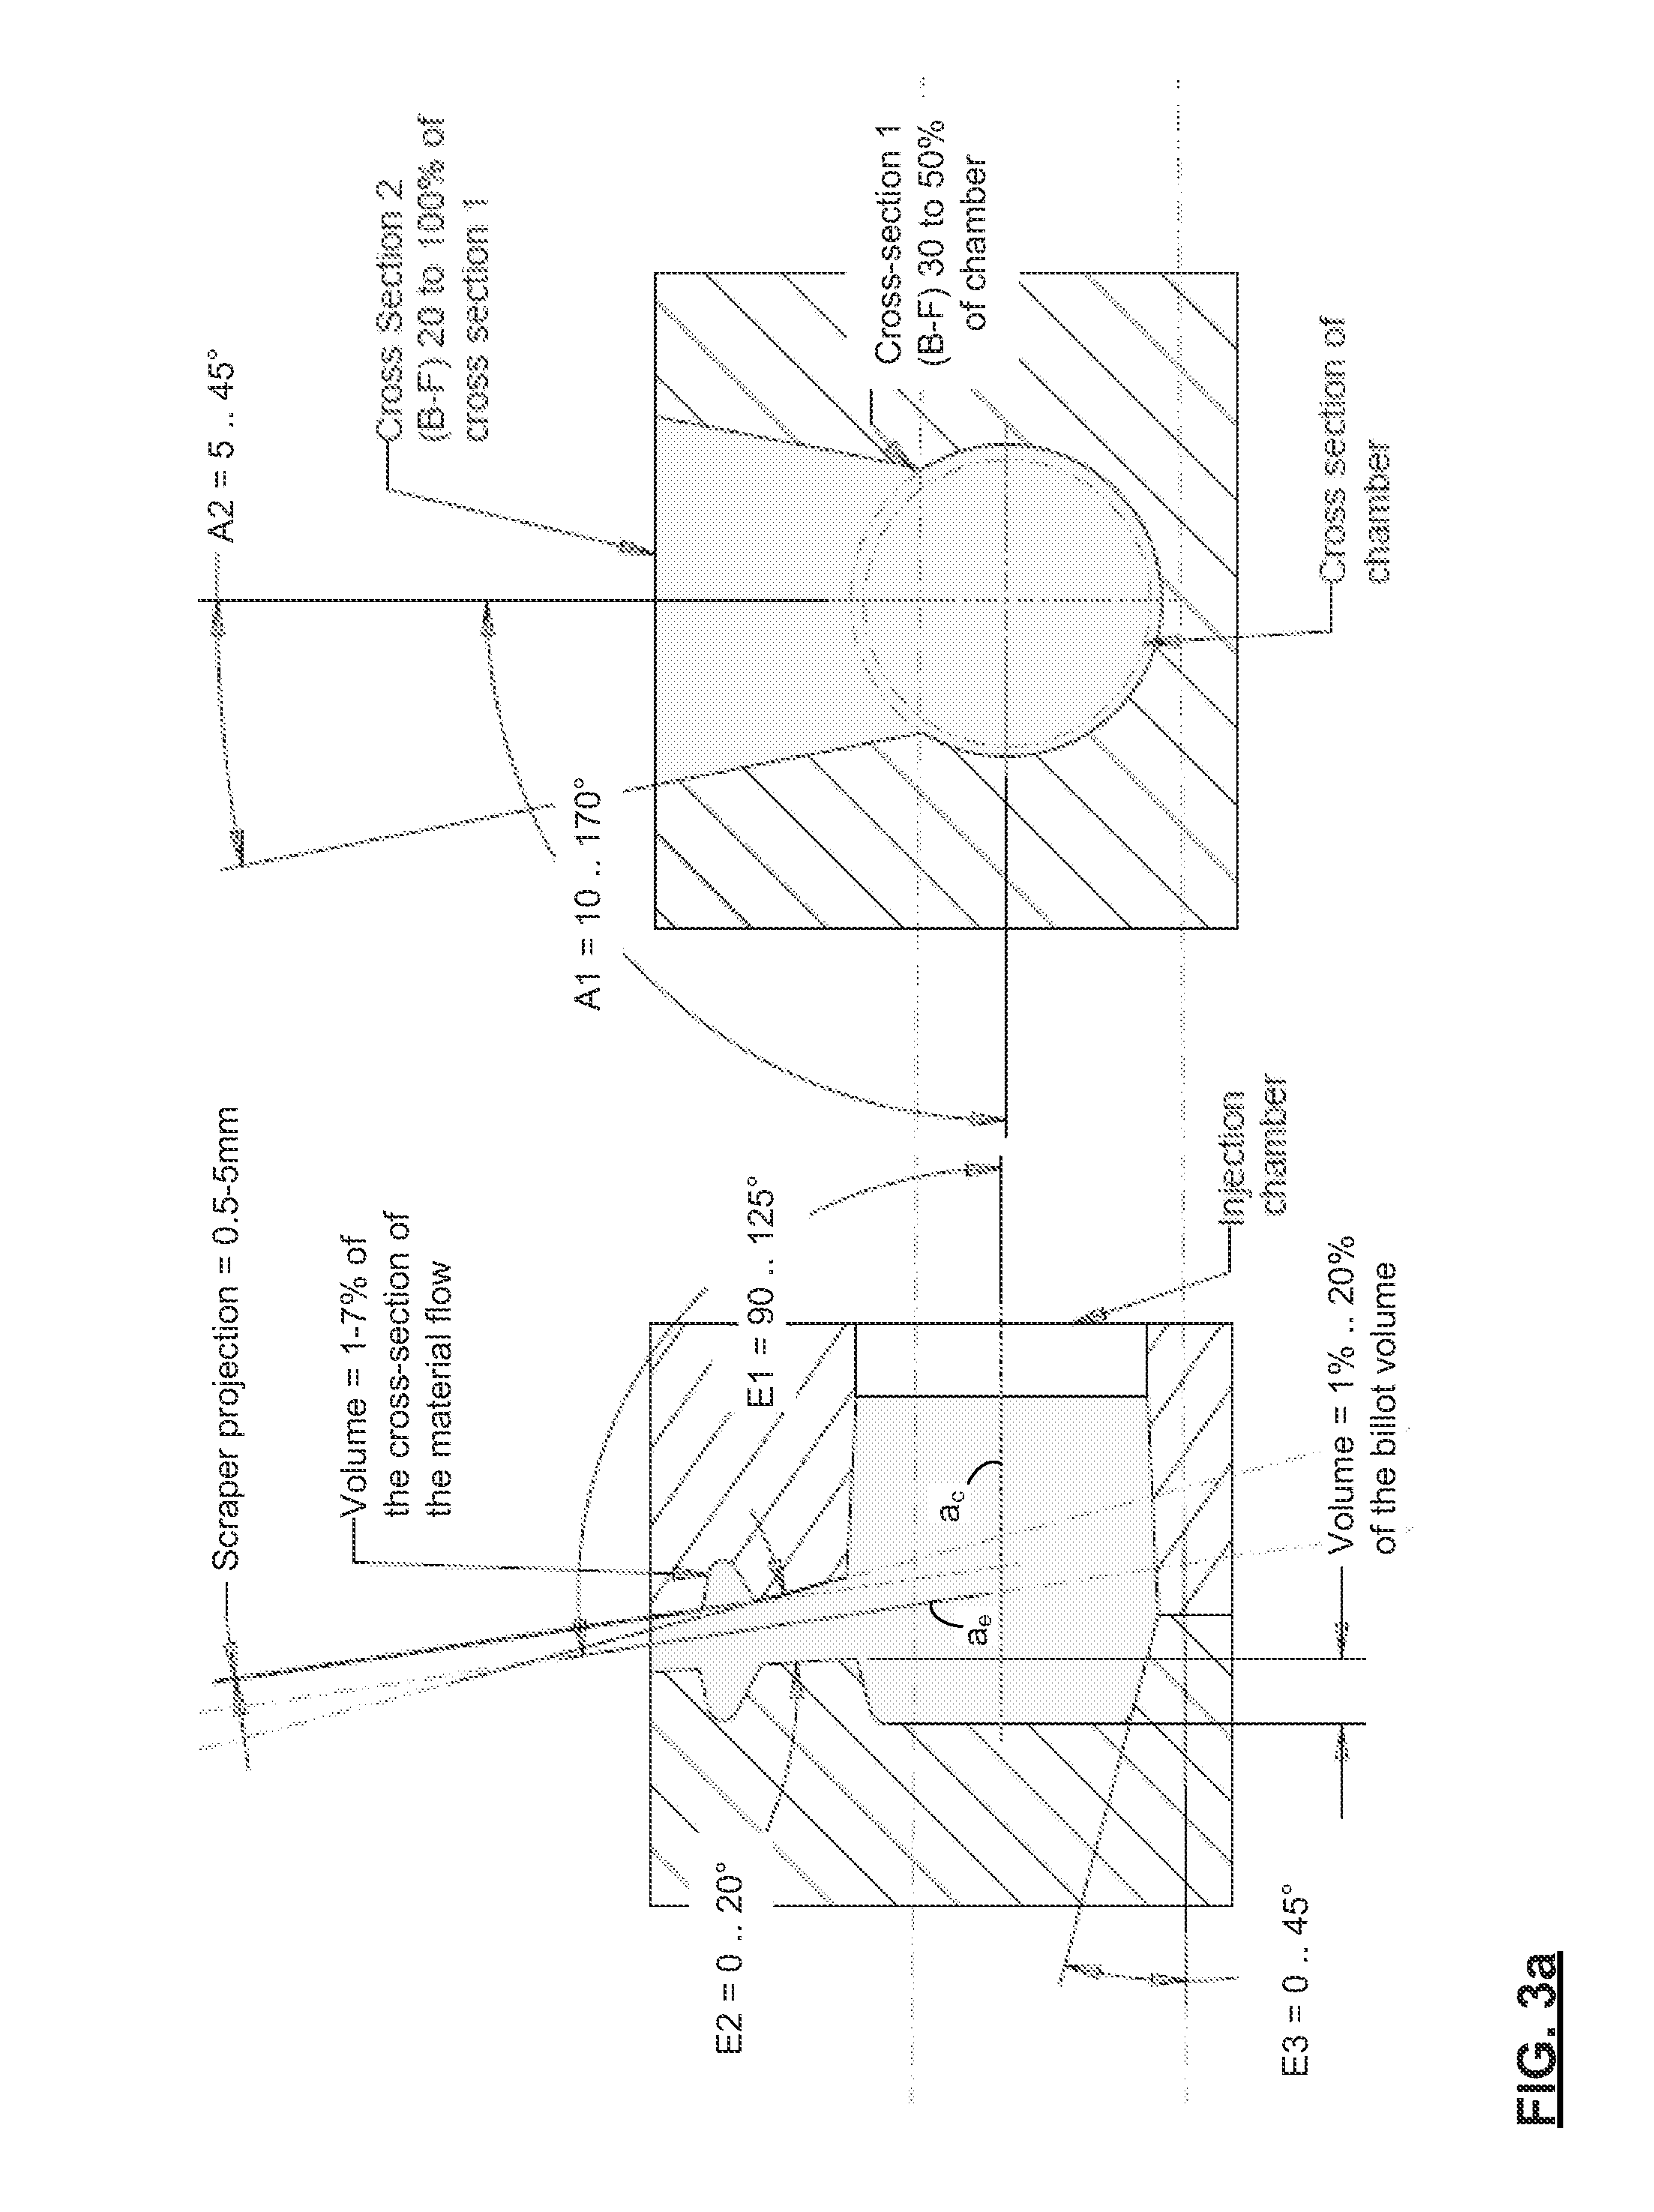 Feeding System for Semi-Solid Metal Injection